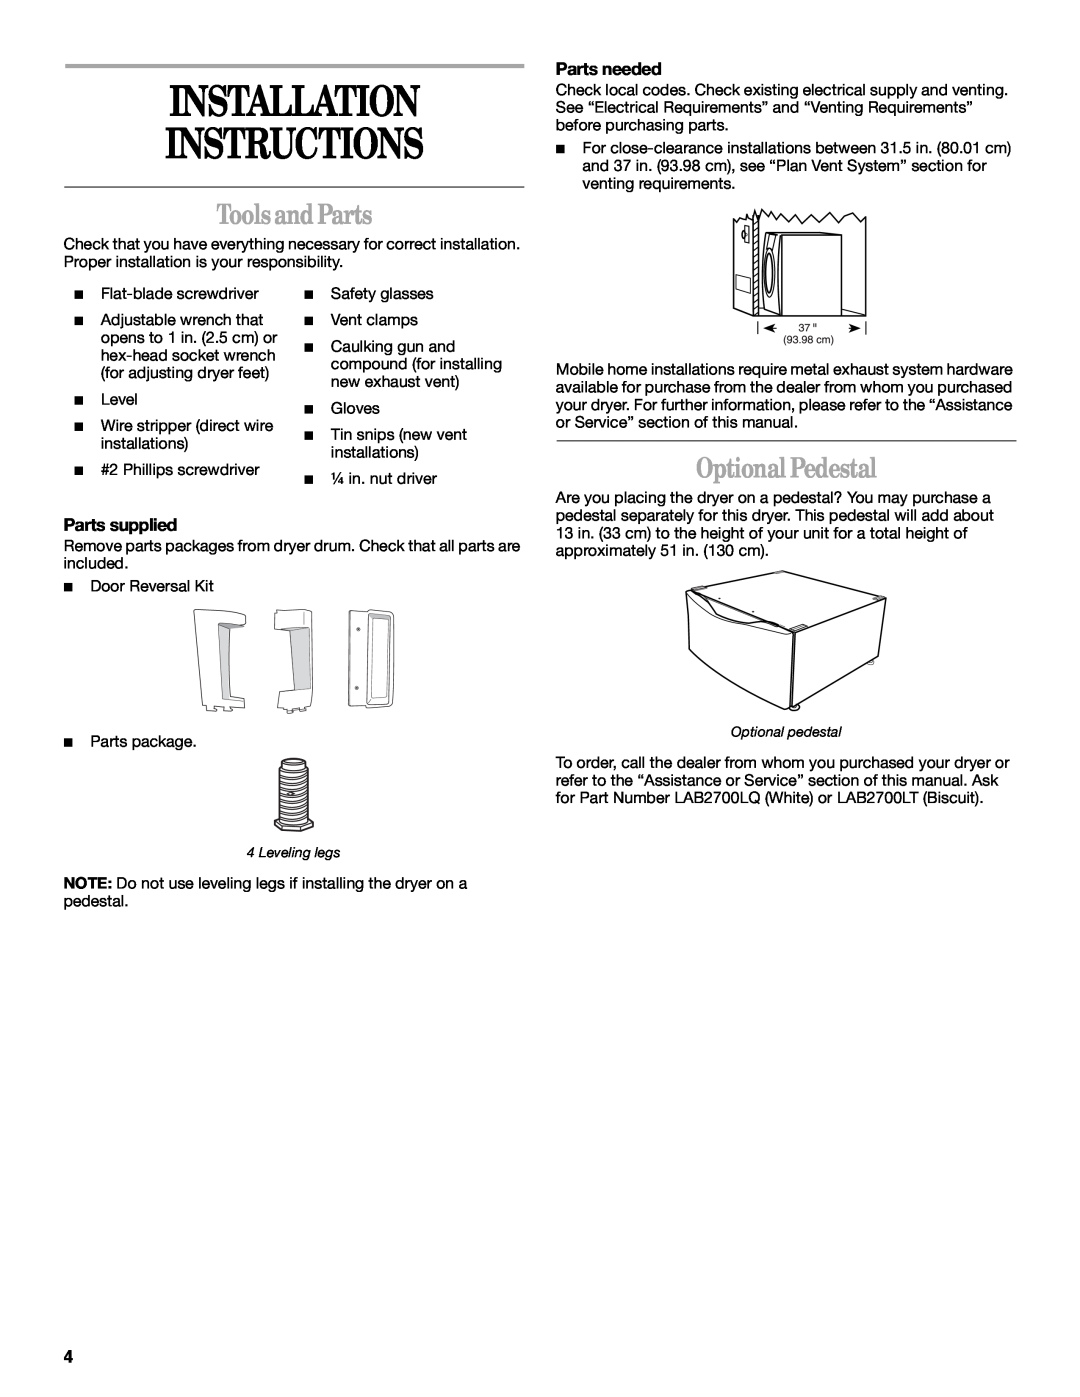 Whirlpool GEW9200LQ0 manual Installation Instructions, ToolsandParts, Optional Pedestal, Parts needed, Parts supplied 